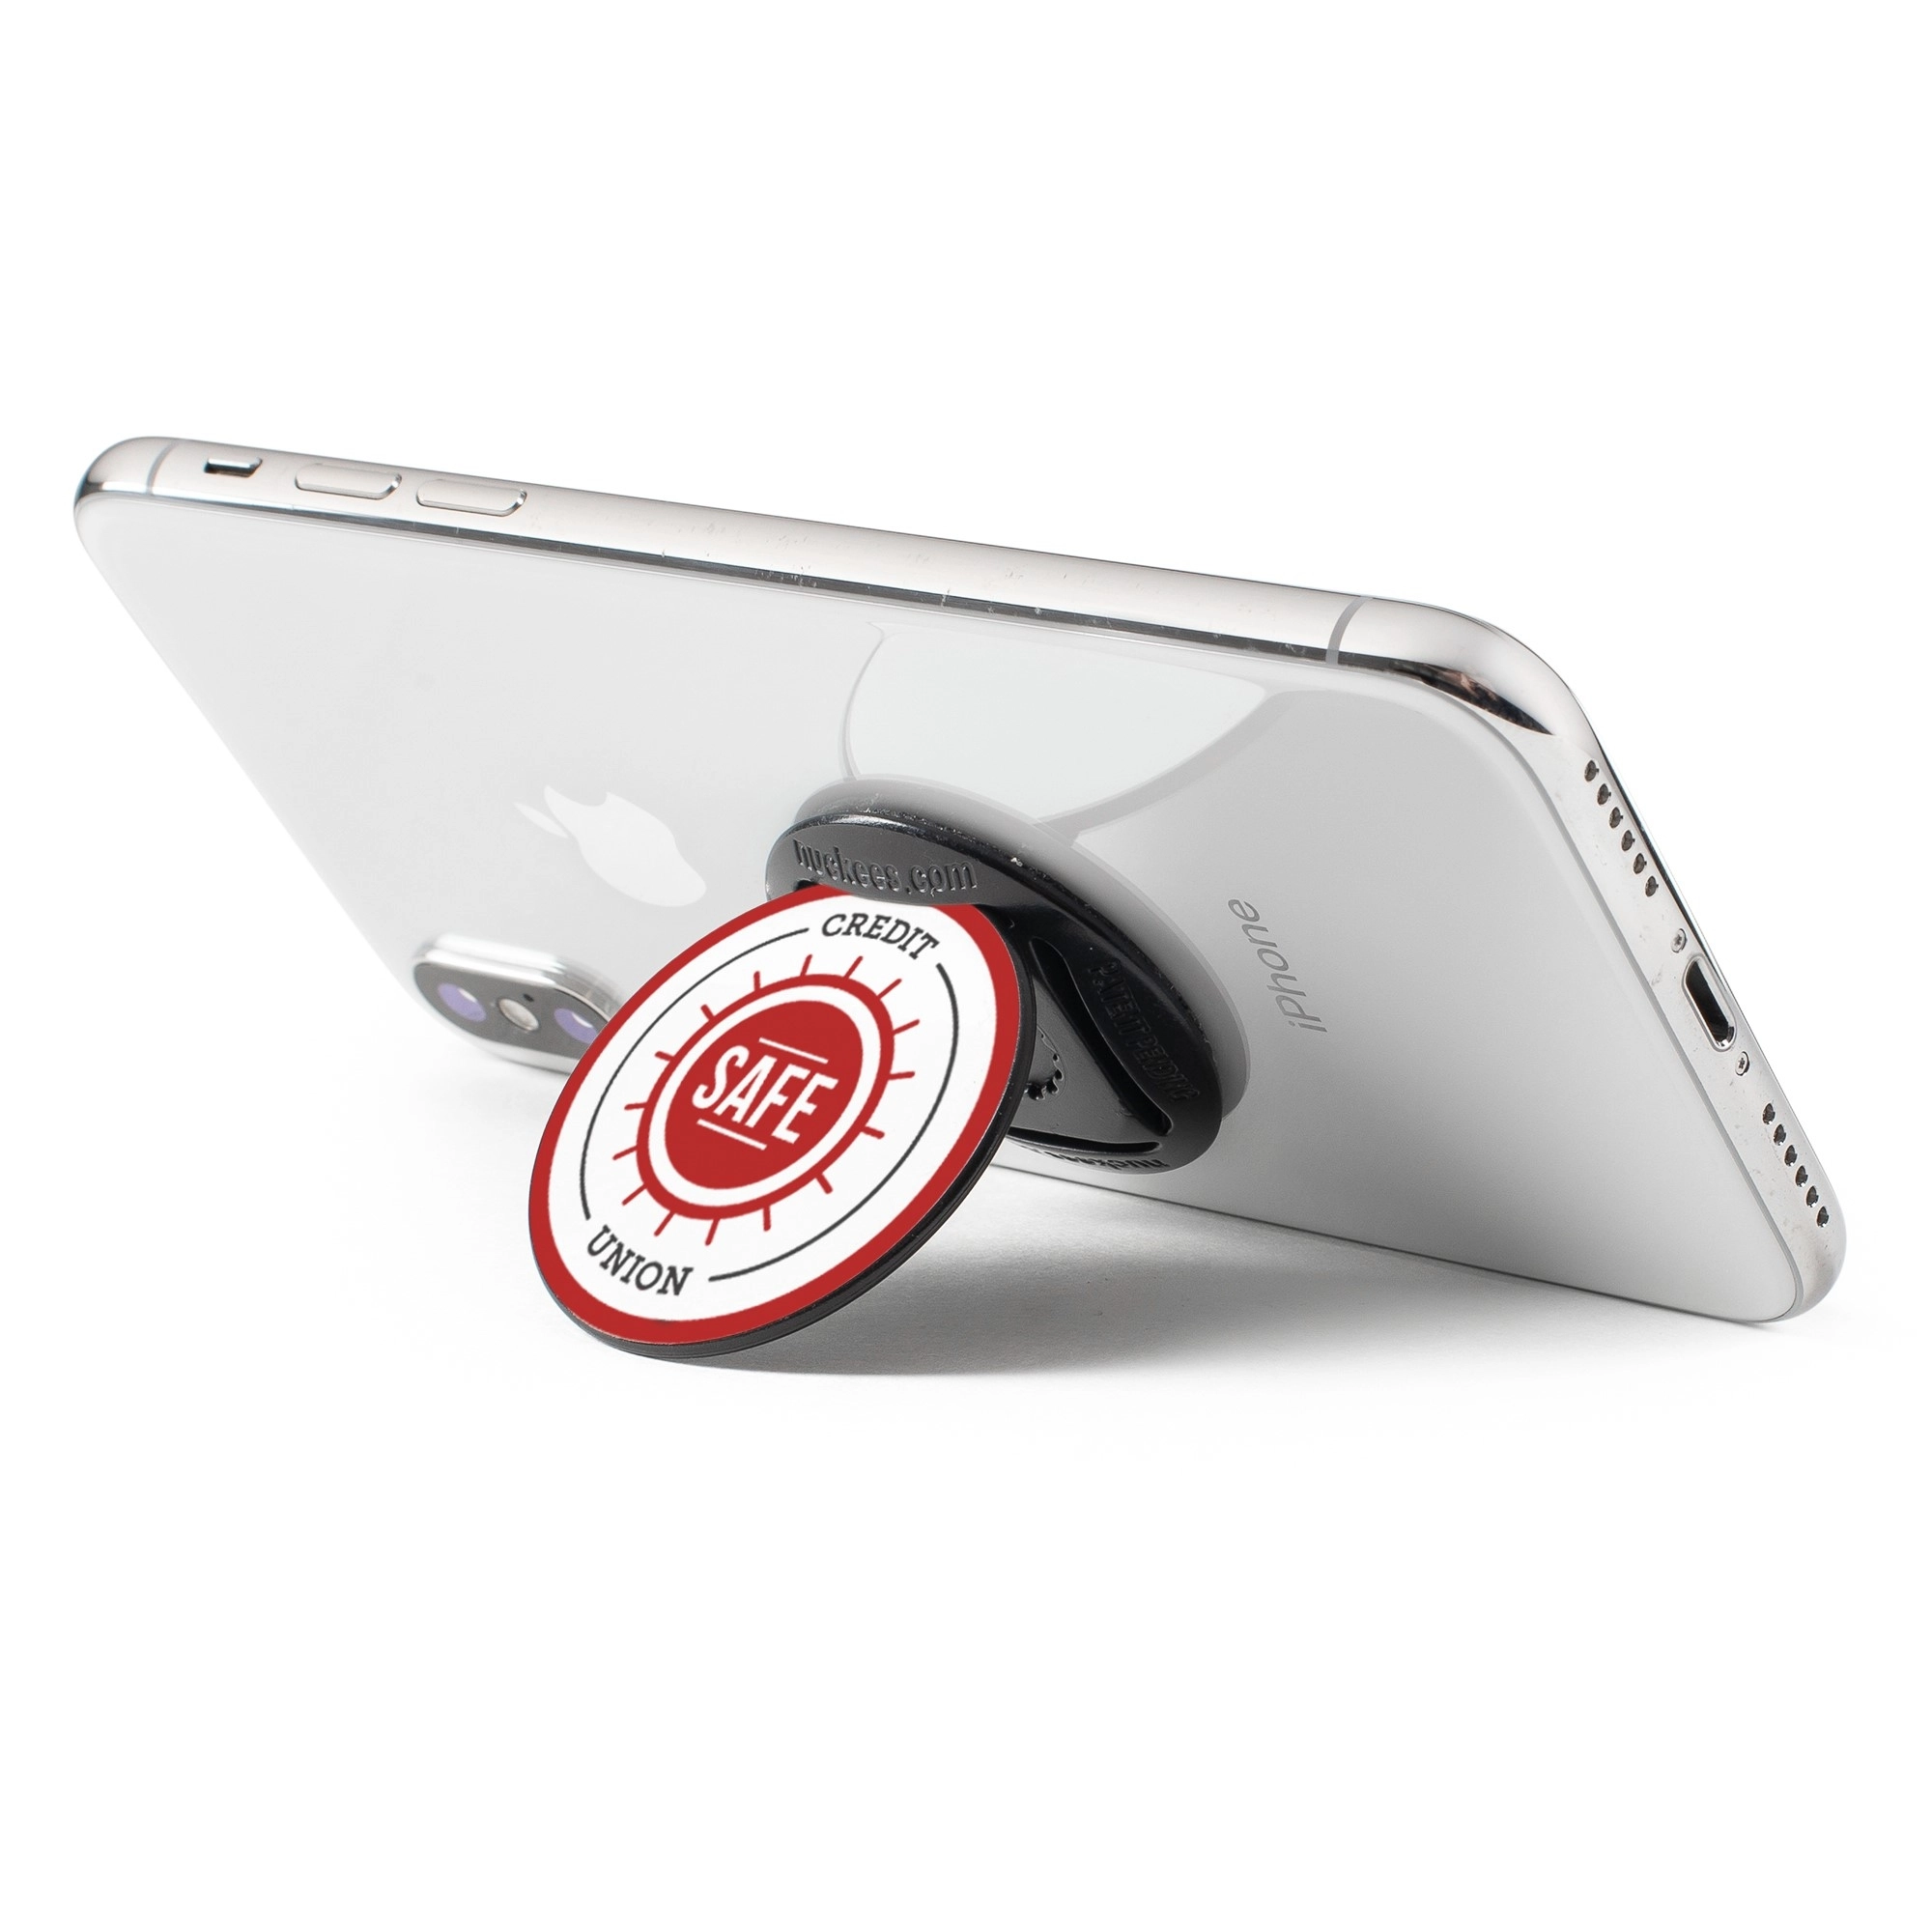 Nuckees Custom Phone Grip And Stand Promotional Phone Stand Epromo